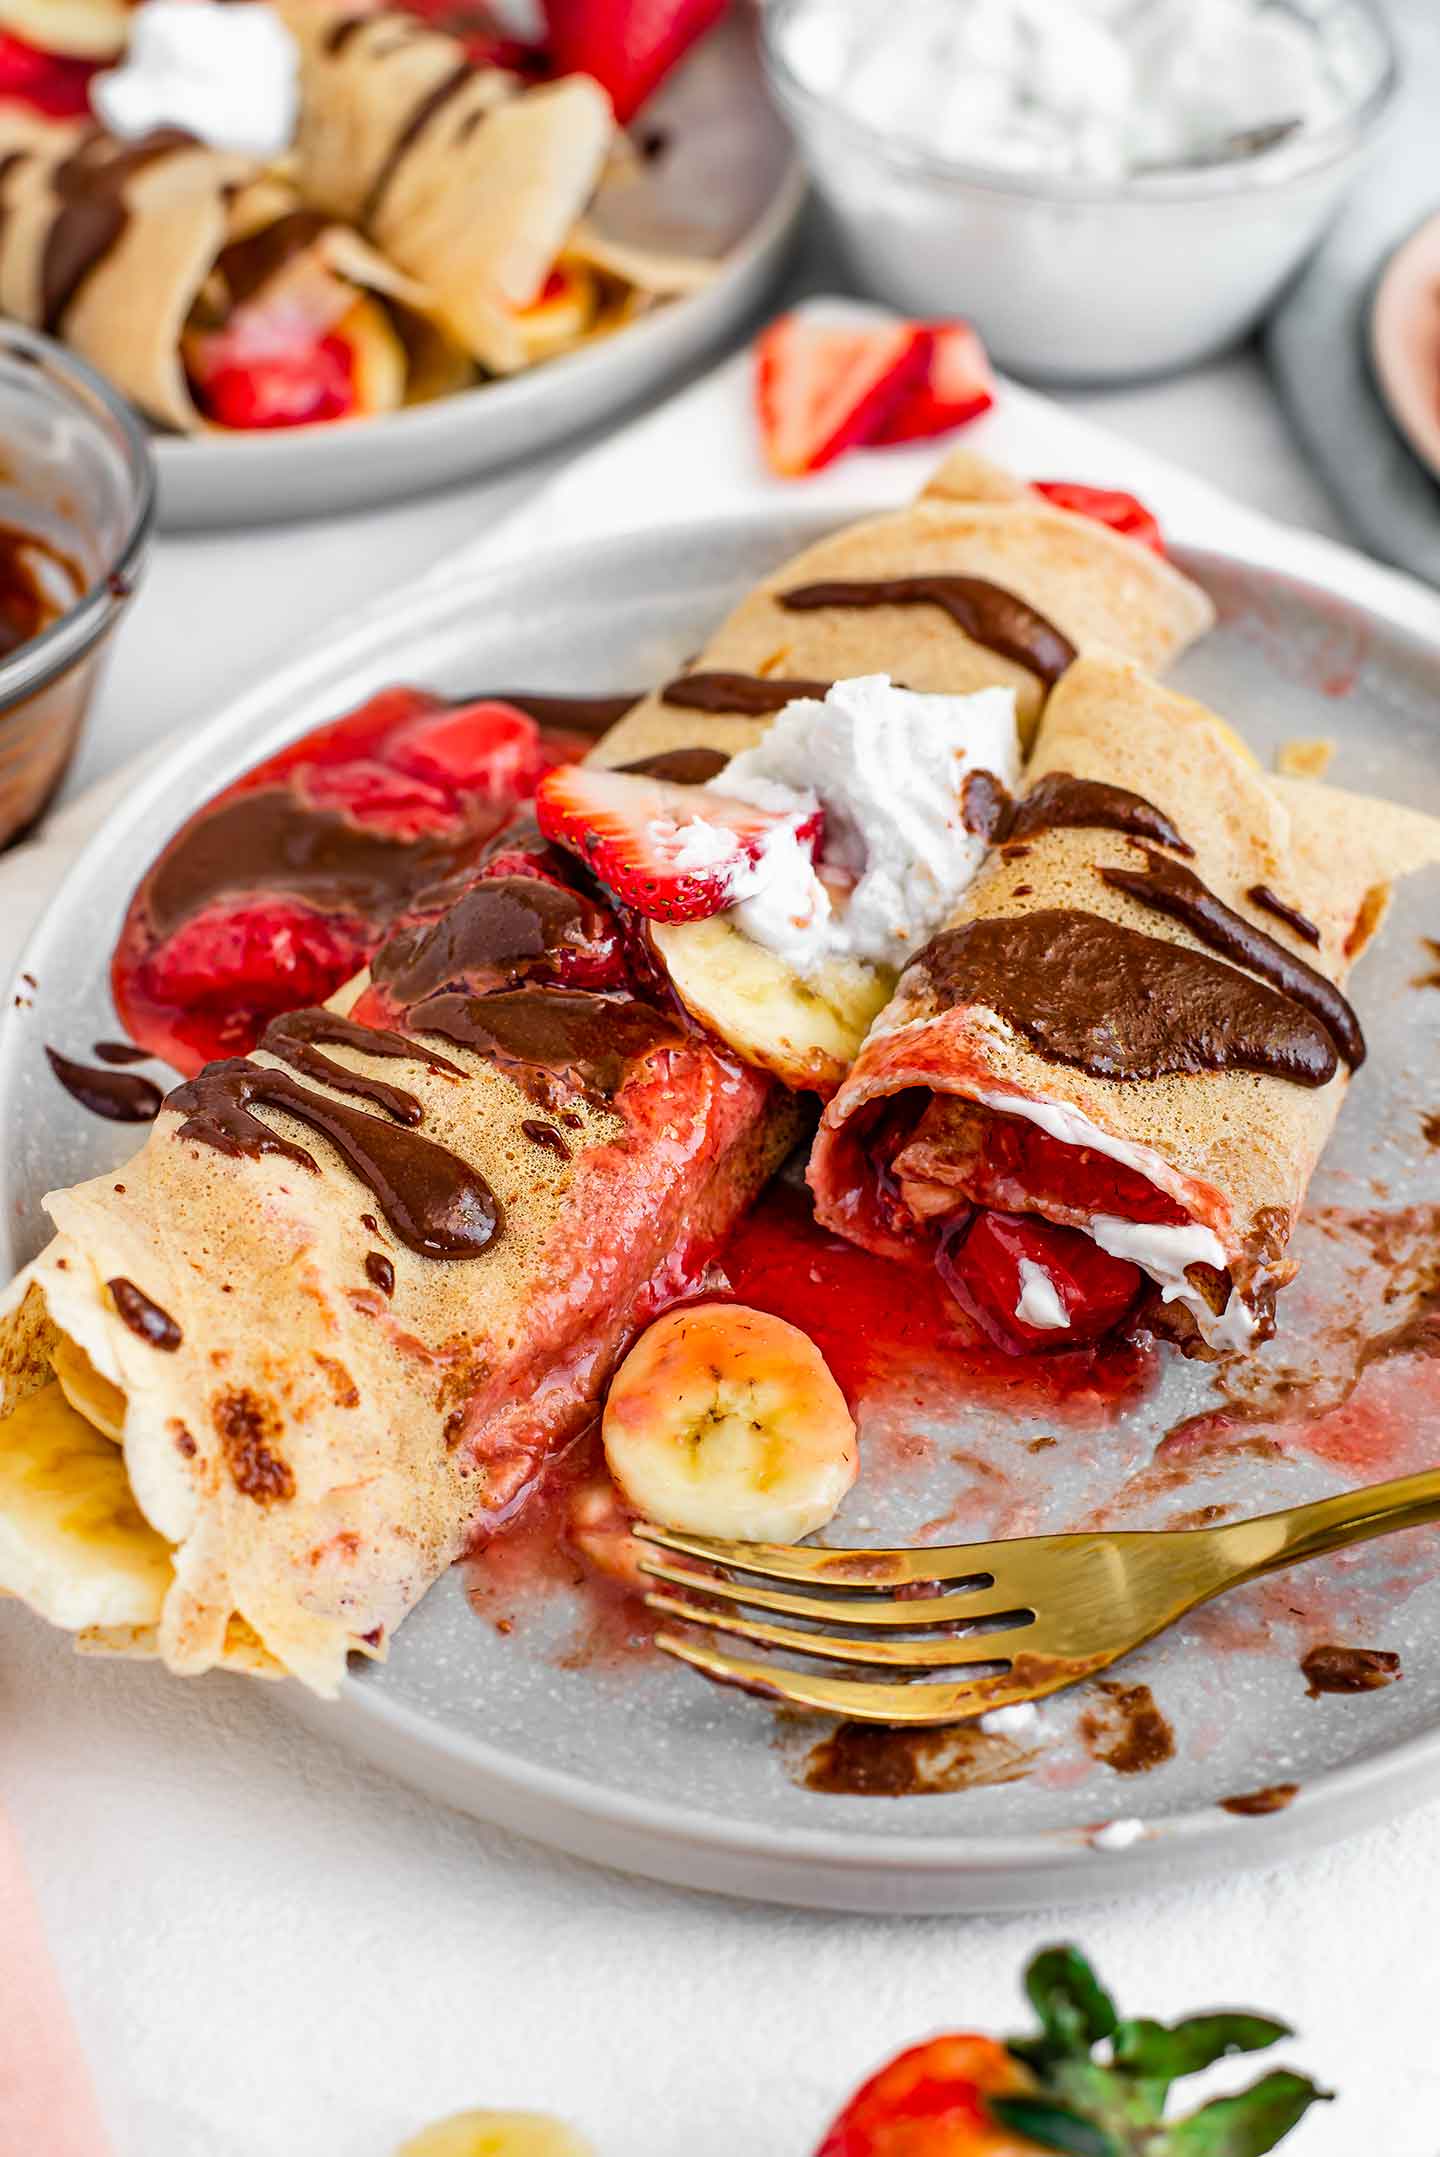 Side view of a fork resting on a plate of crepes with one crepe half eaten exposing the warm strawberry filling inside.